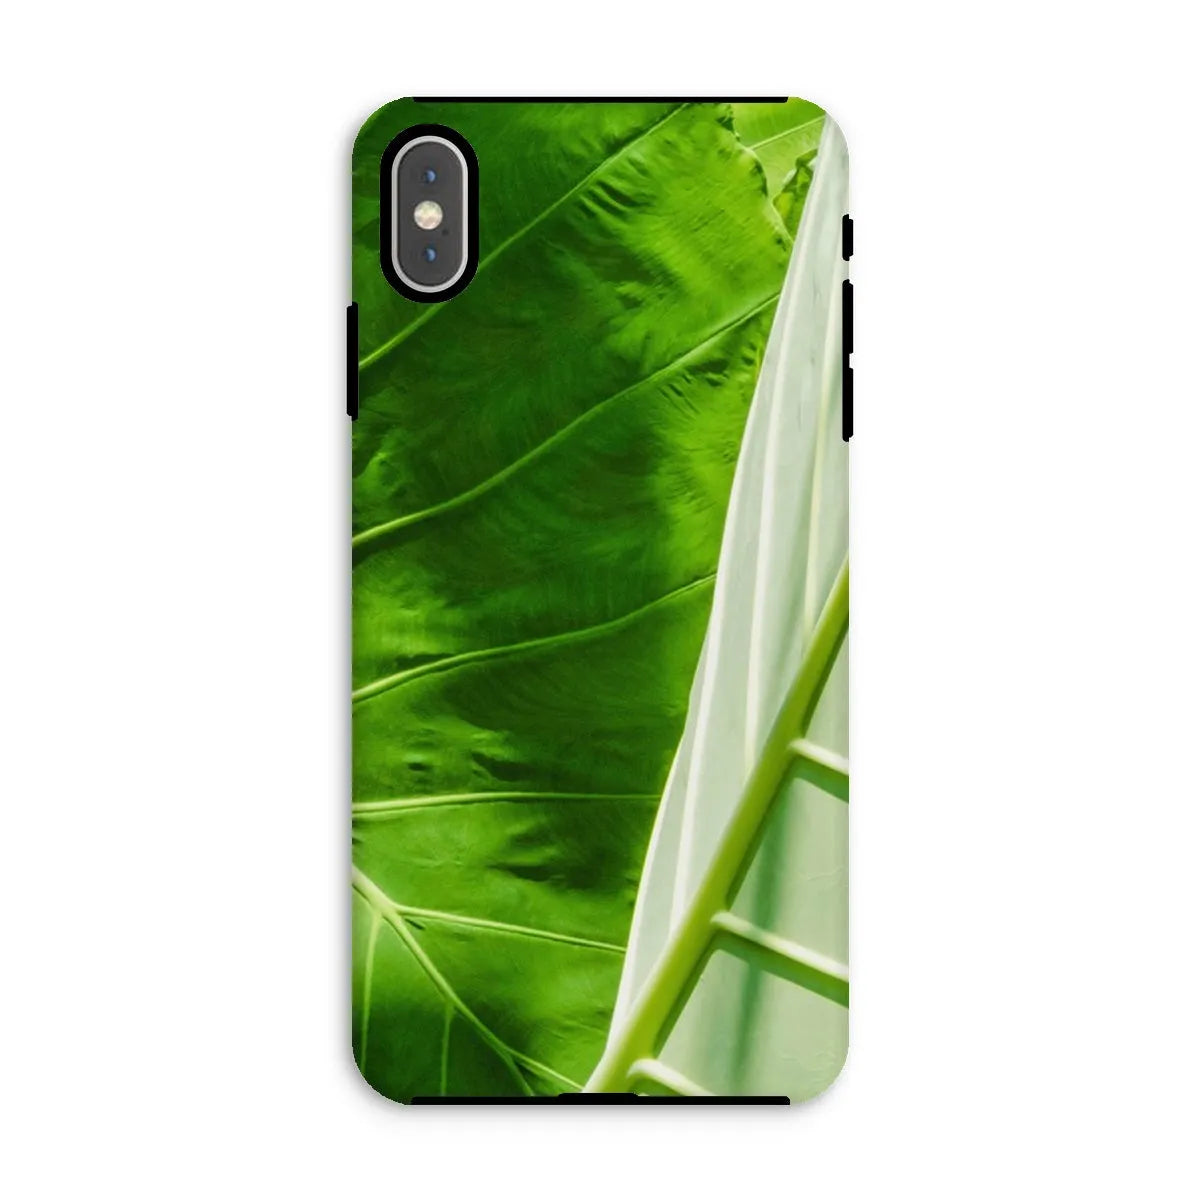 Clash Of The Hulks Tough Phone Case - Iphone Xs Max / Matte - Mobile Phone Cases - Aesthetic Art